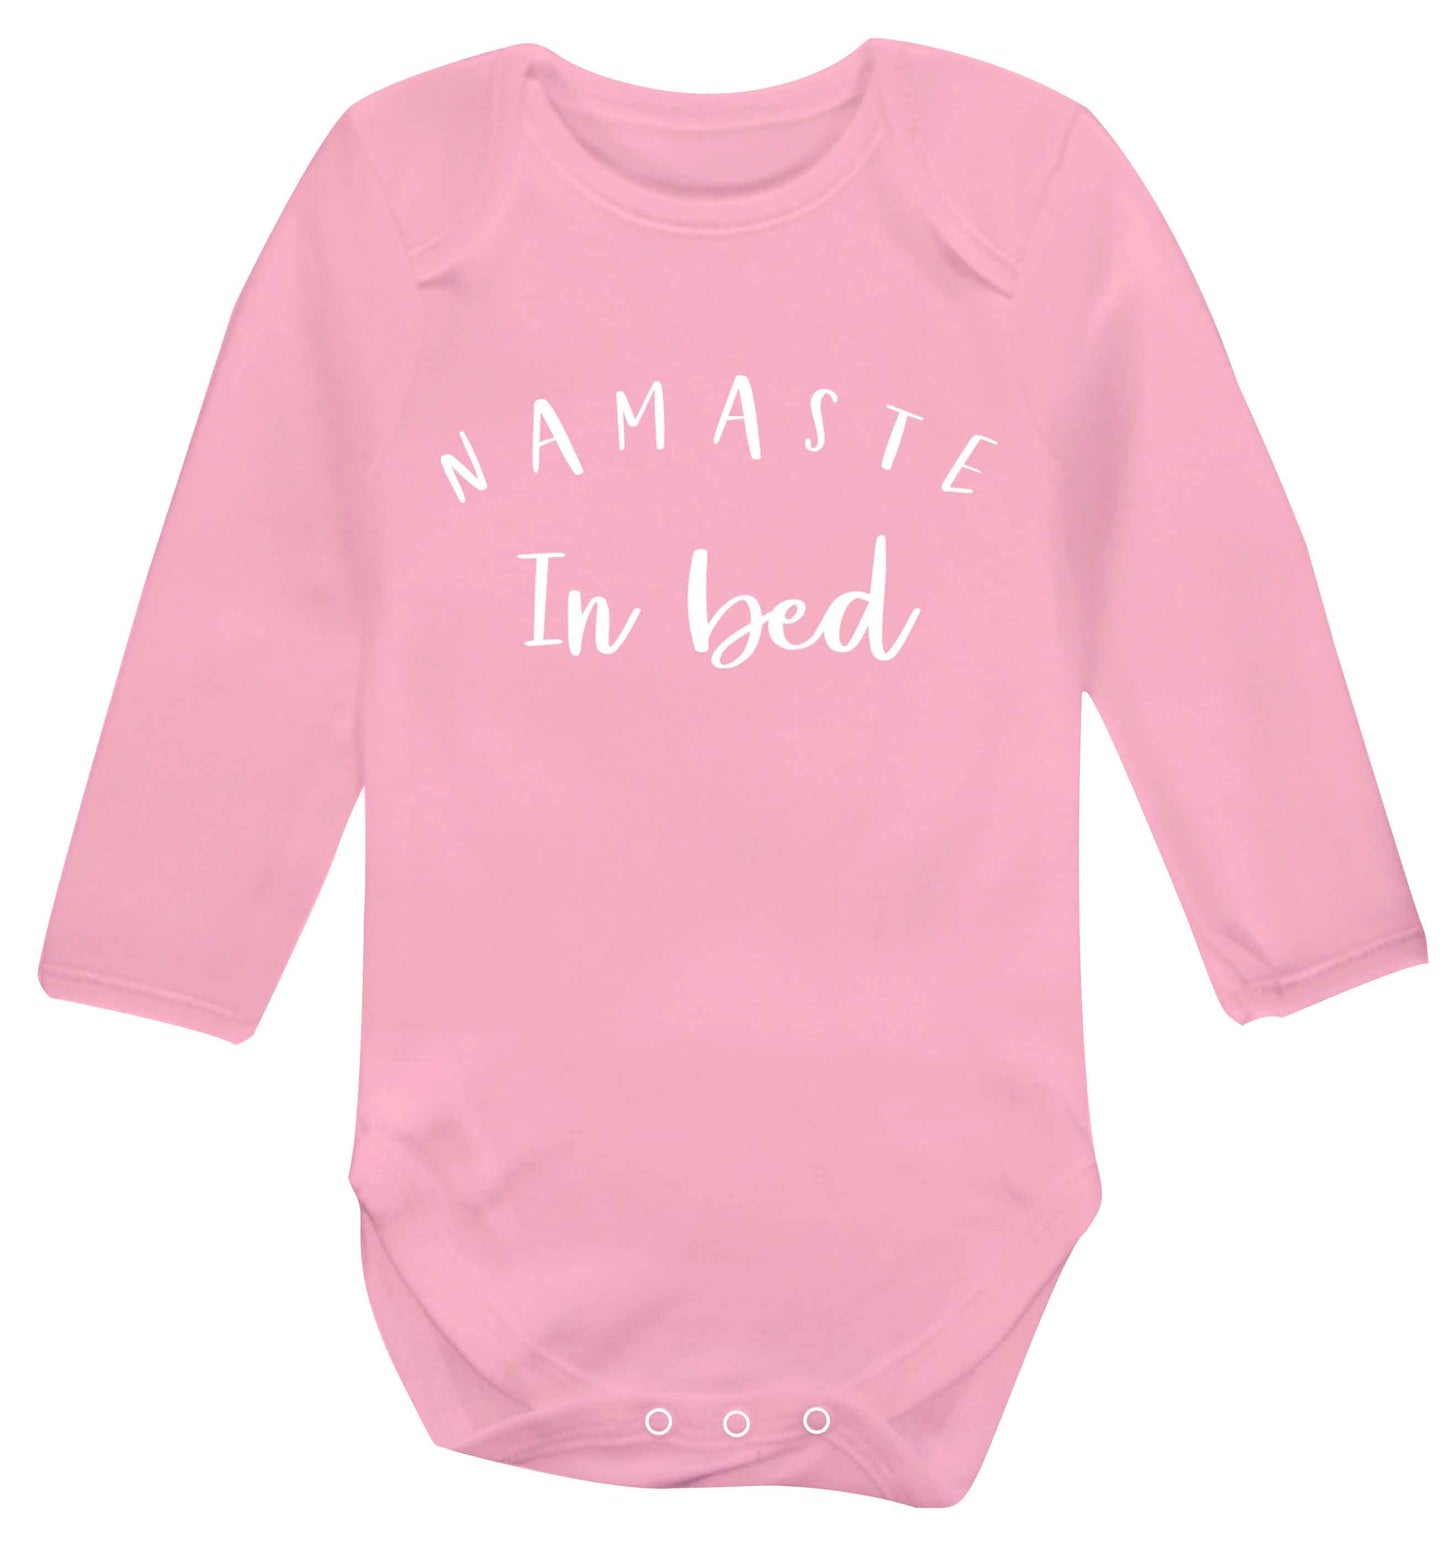 Namaste in bed Baby Vest long sleeved pale pink 6-12 months